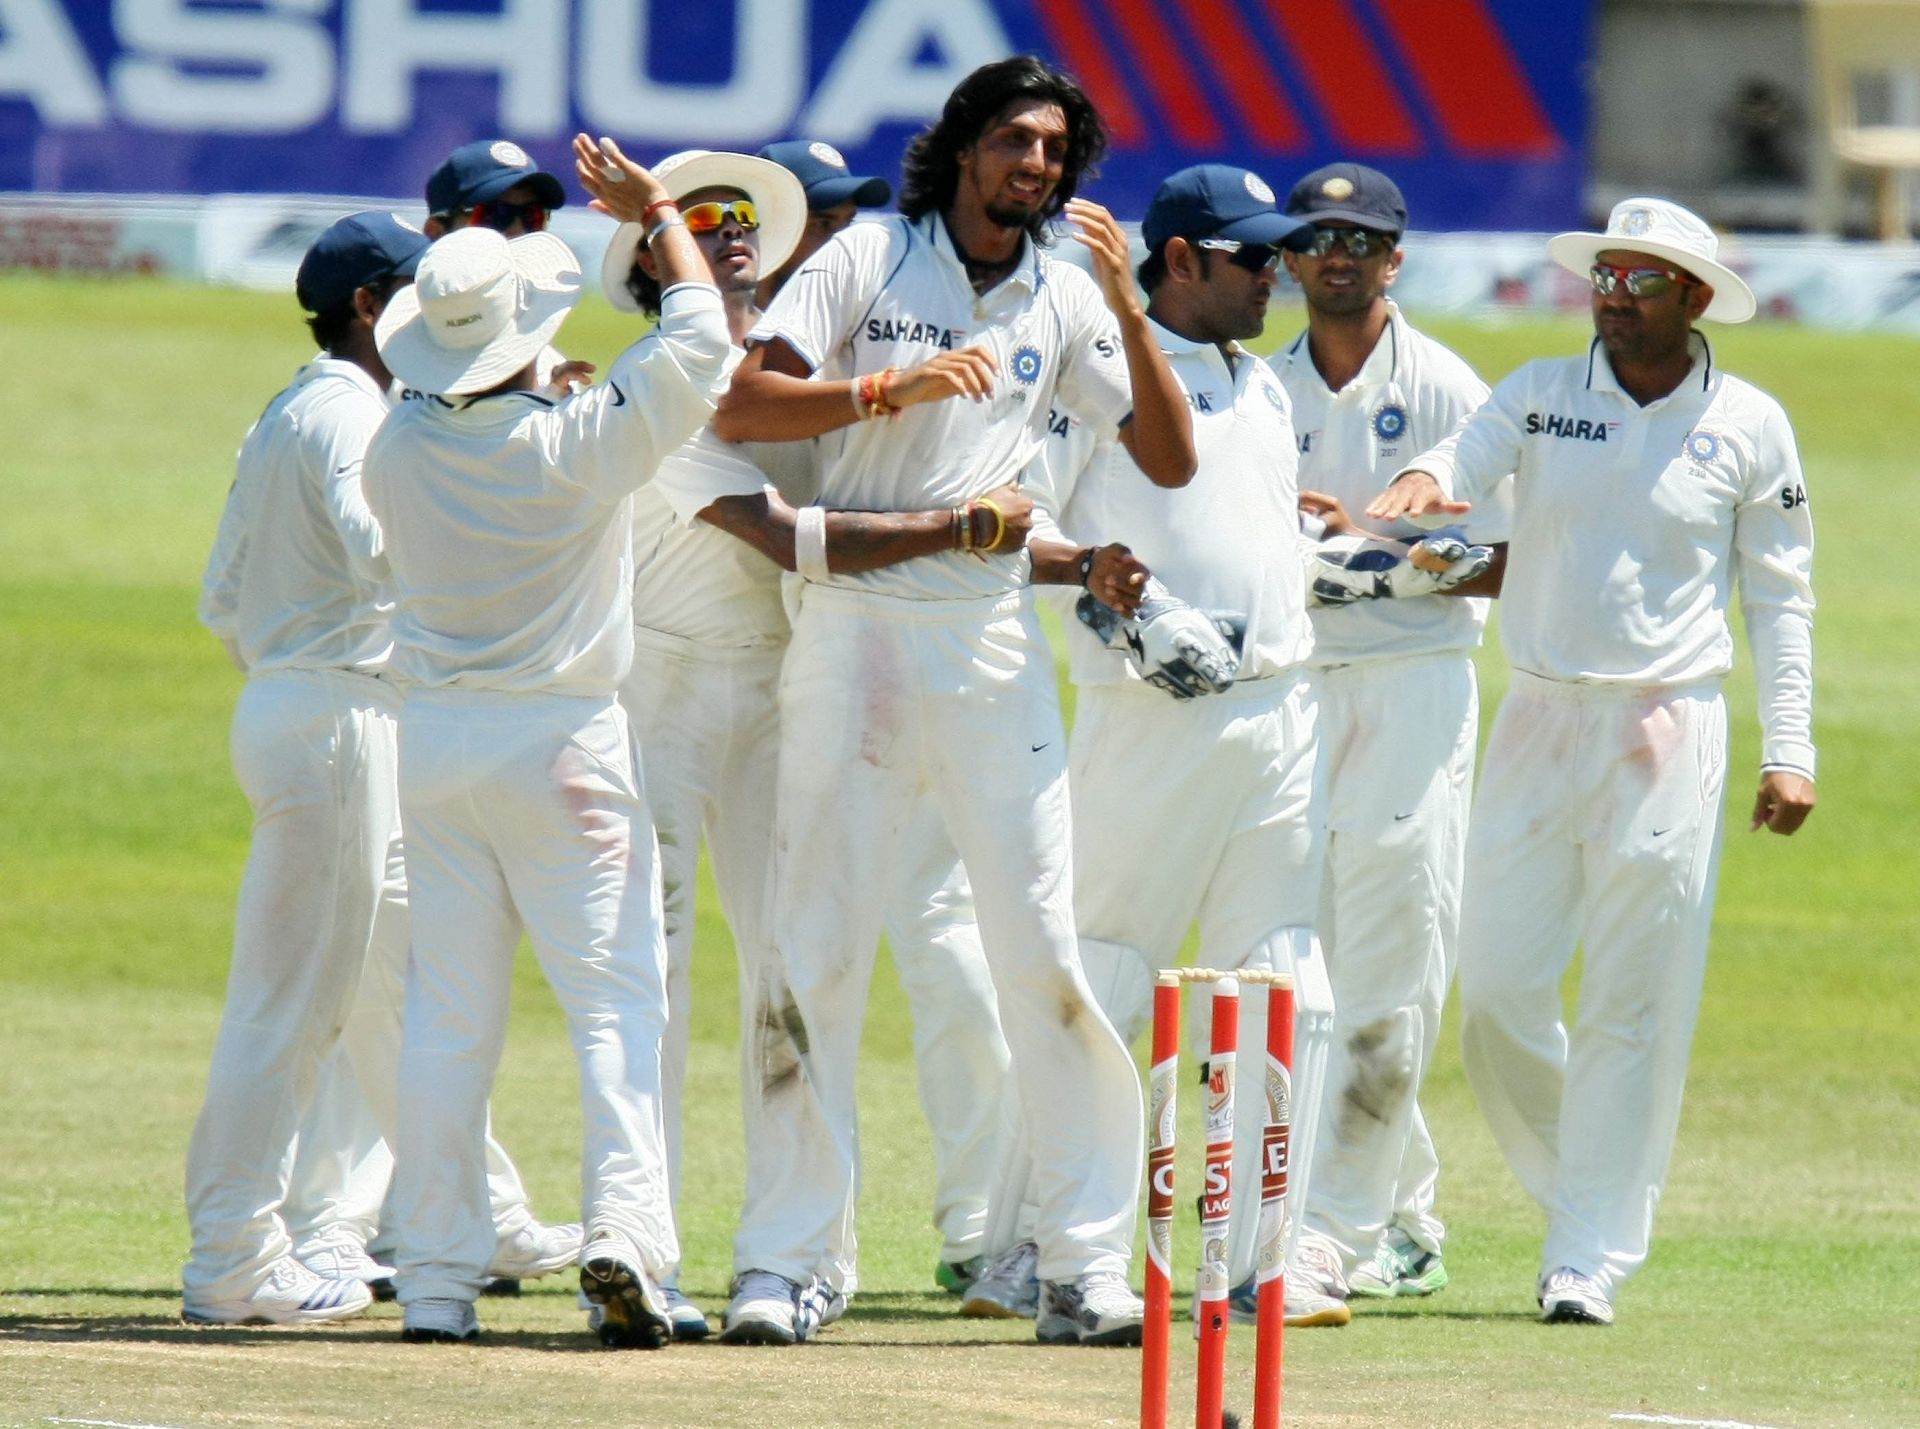 India celebrate a wicket during the 2010 Durban Test. Pic: Getty Images